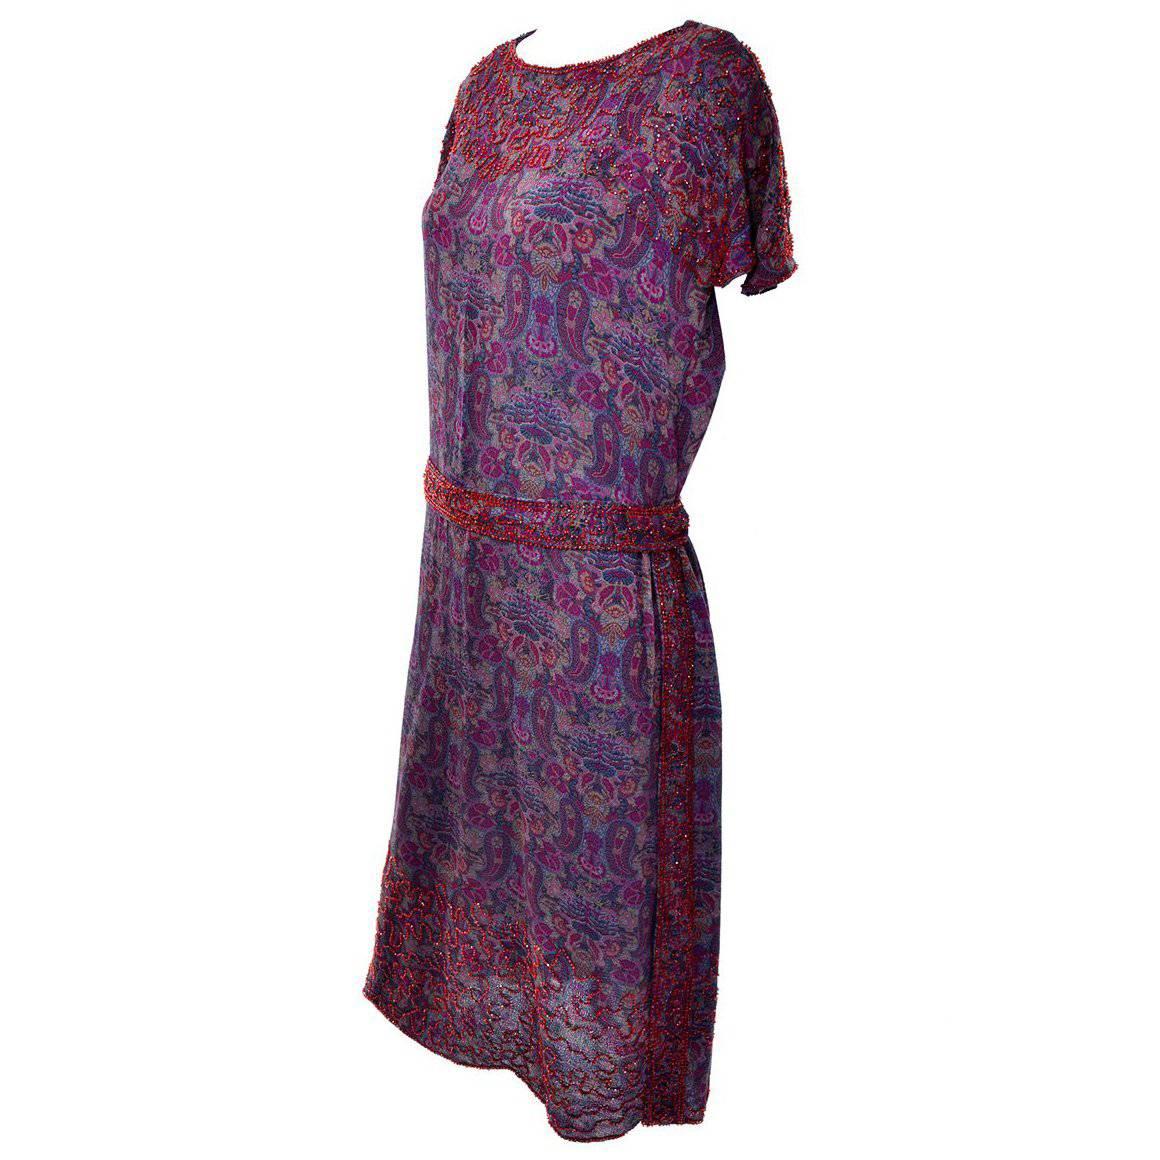 1920s Vintage Beaded Purple Paisley Dress With Red Beads